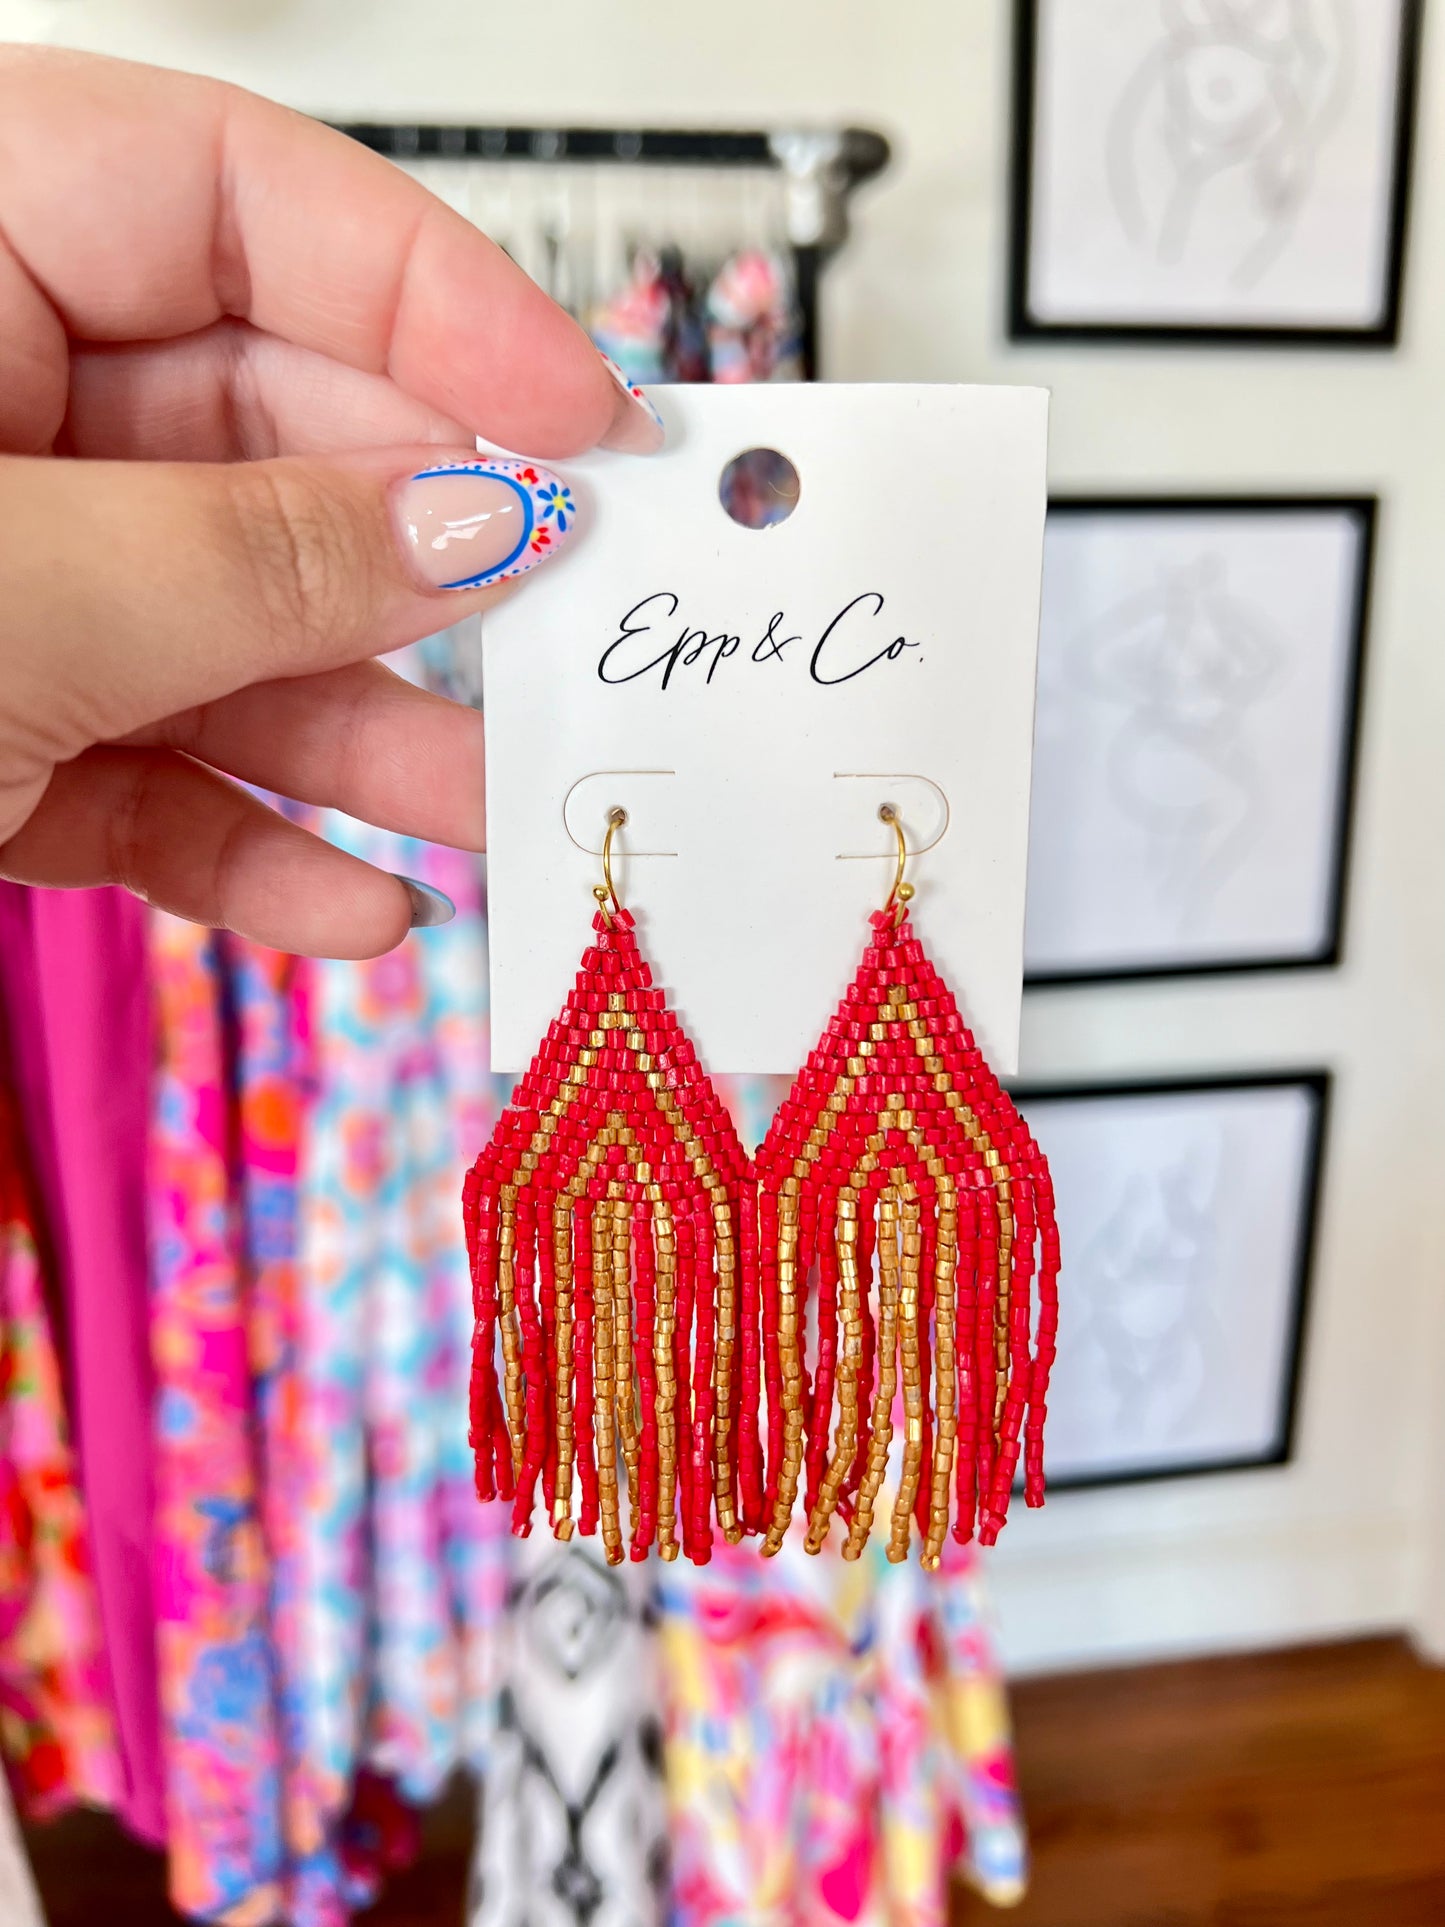 Red and Gold Beaded Fringes